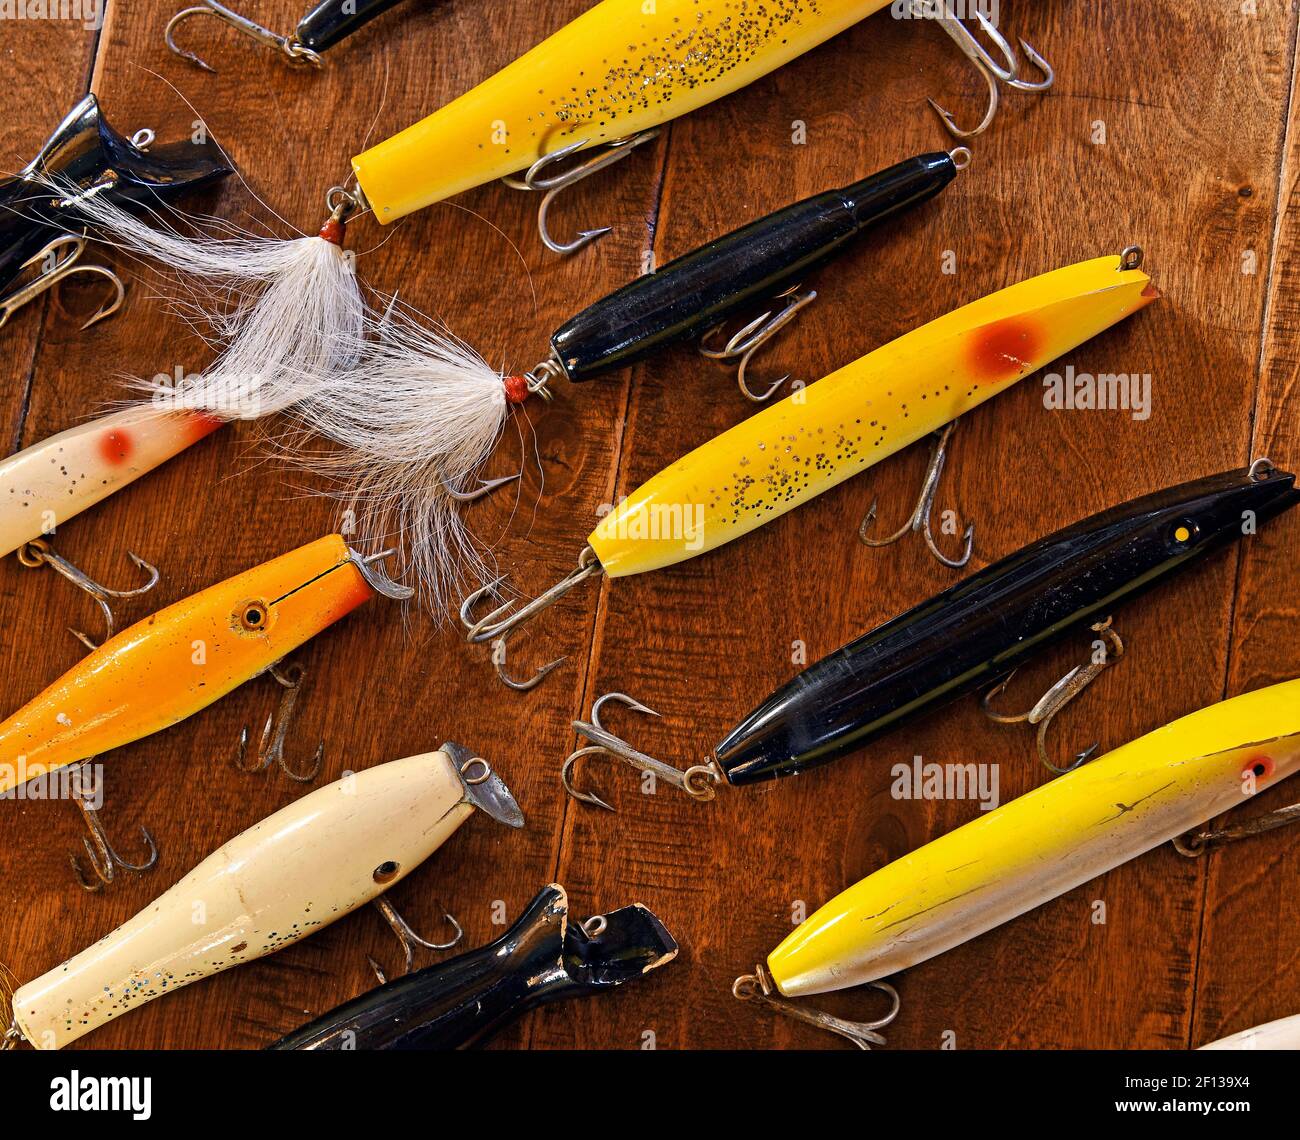 Wooden vintage colorful fishing lures Stock Photo